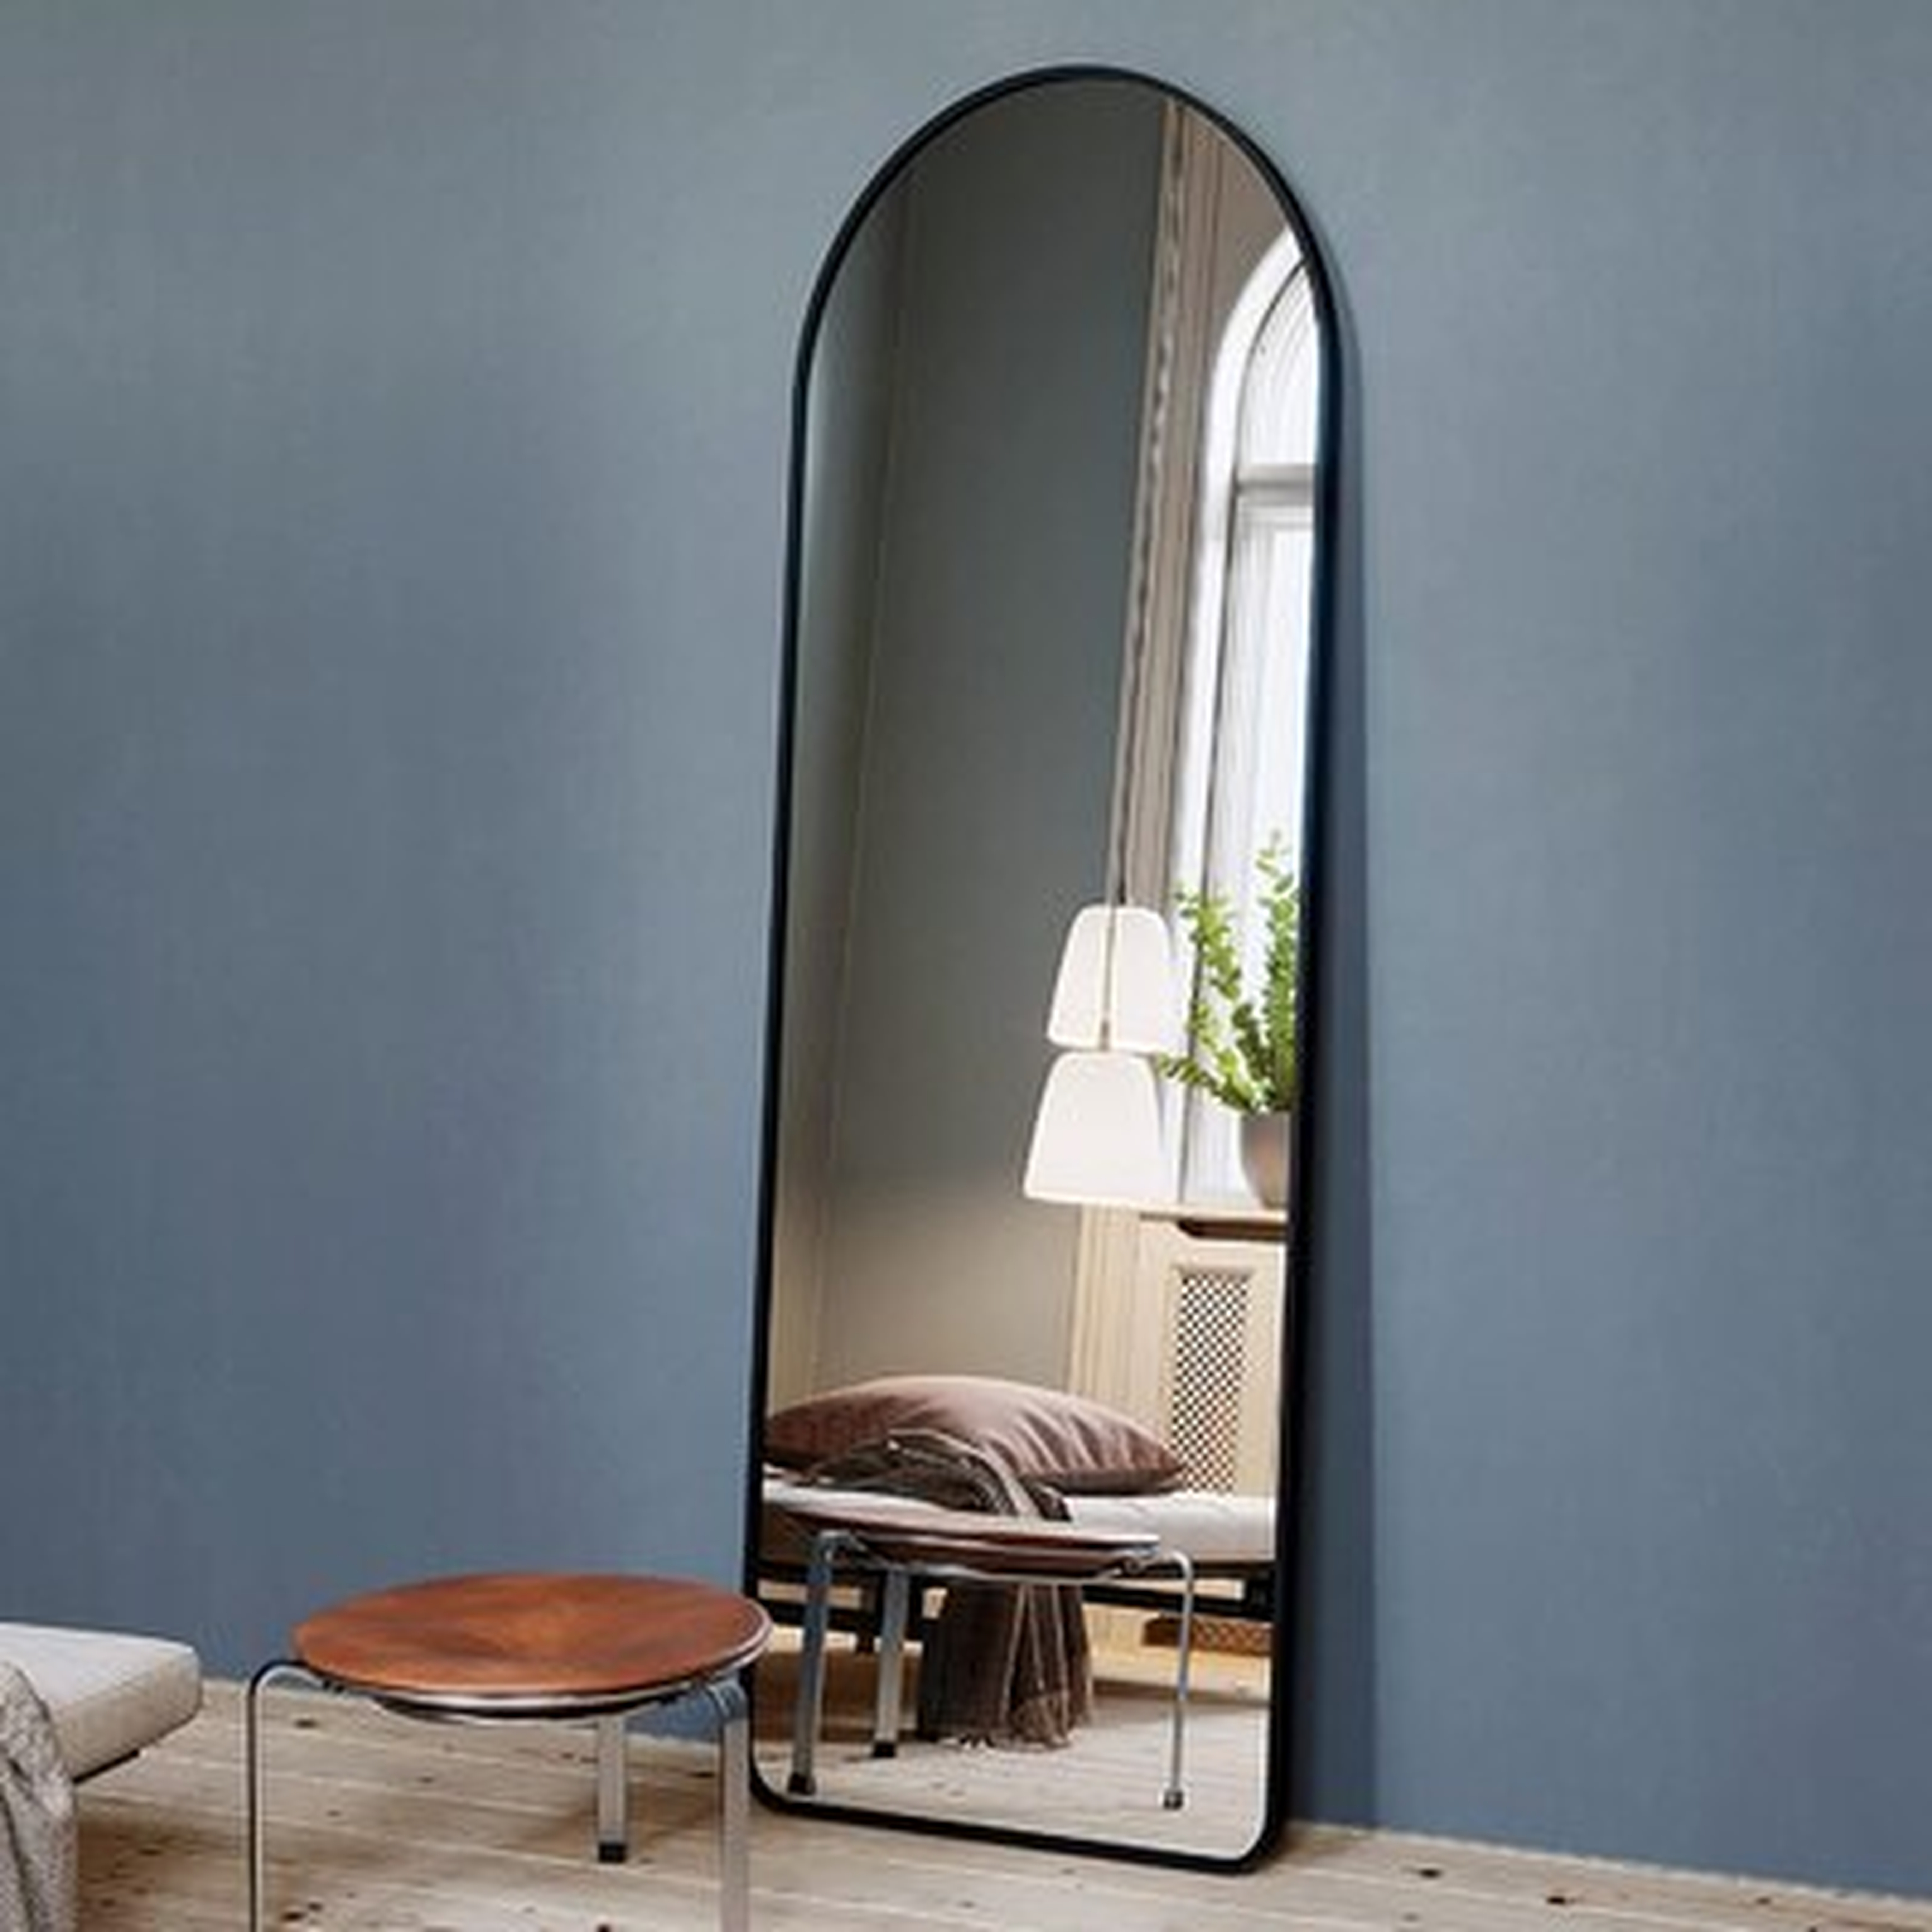 Arched Full Length Mirror, 65"X22" Floor Length Mirror With Aluminum Alloy Frame, Full Body Mirror With Stand, Standing Hanging Or Leaning Against Wall - Wayfair